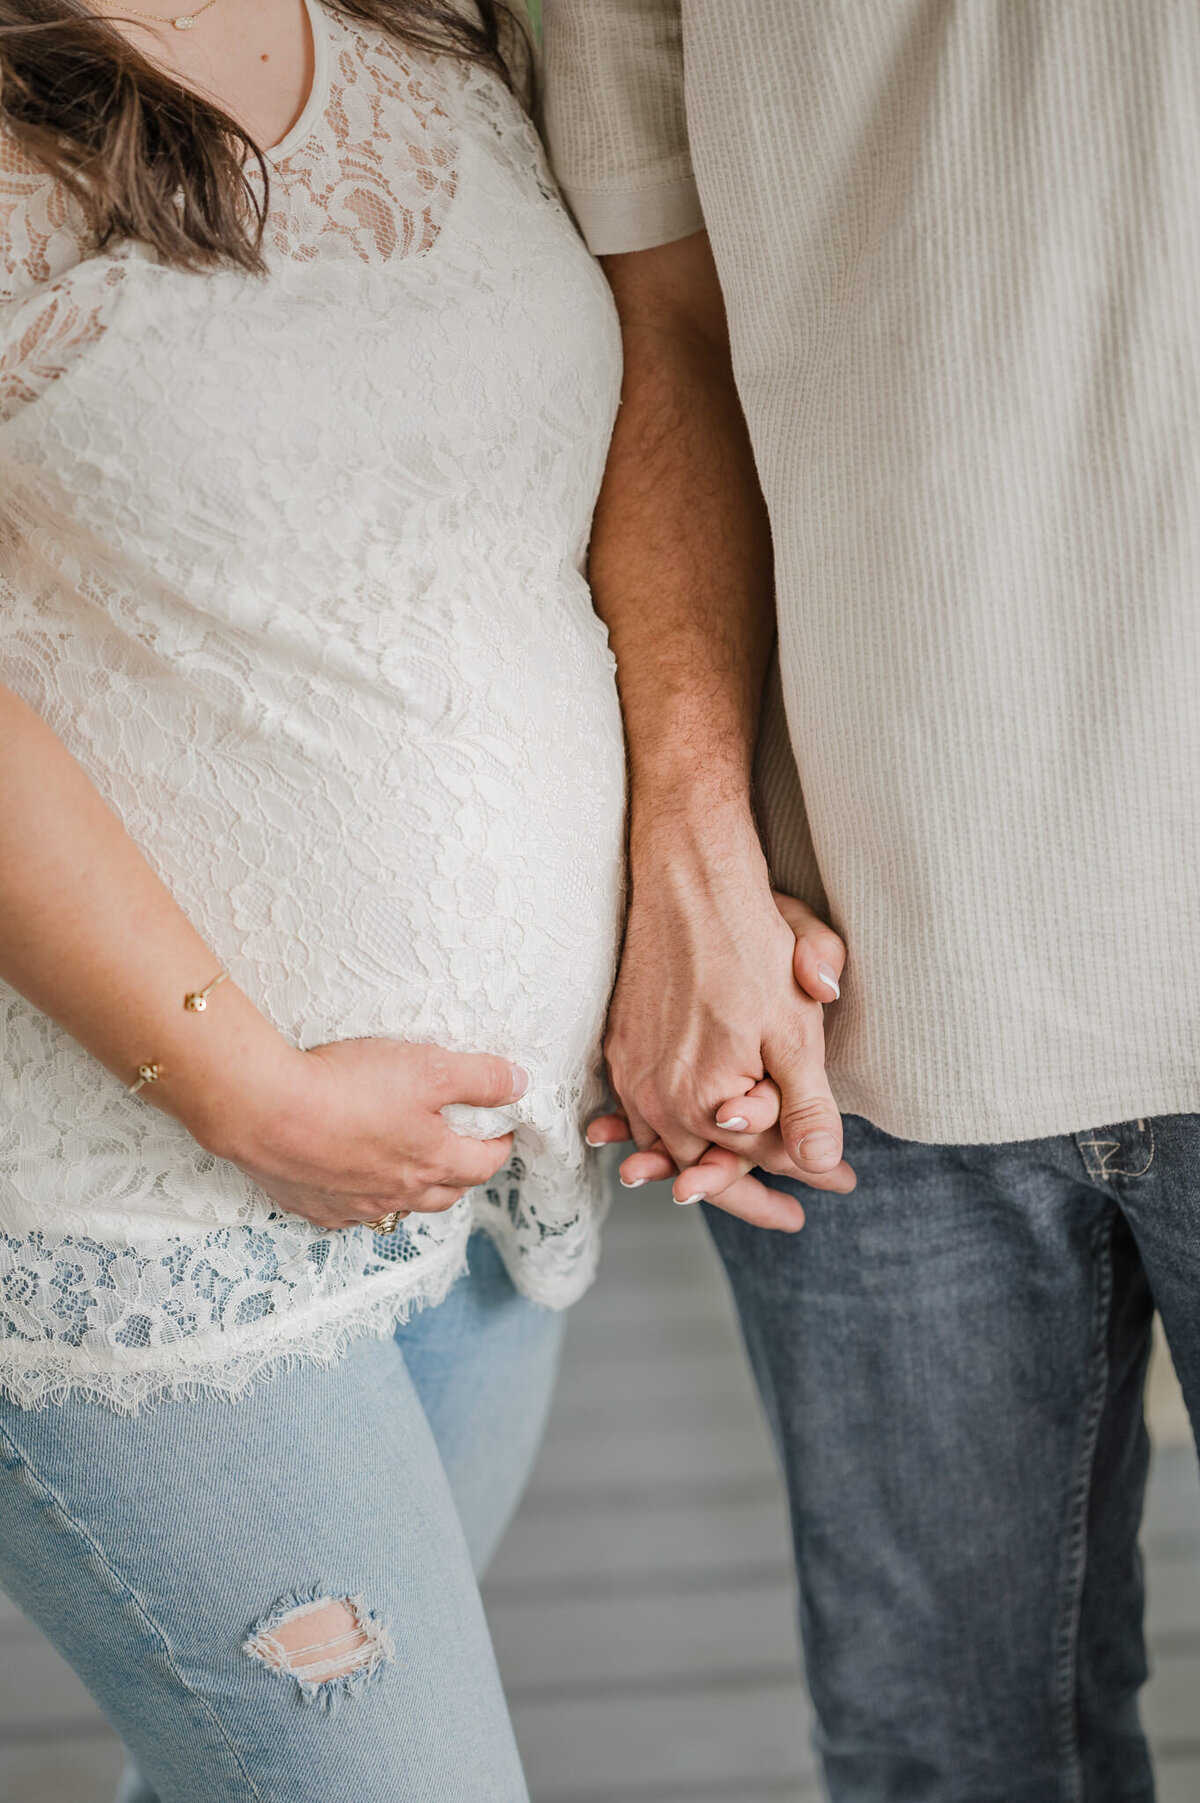 Close up picture of a man and woman holding hands and she's cradling her pregnant belly.